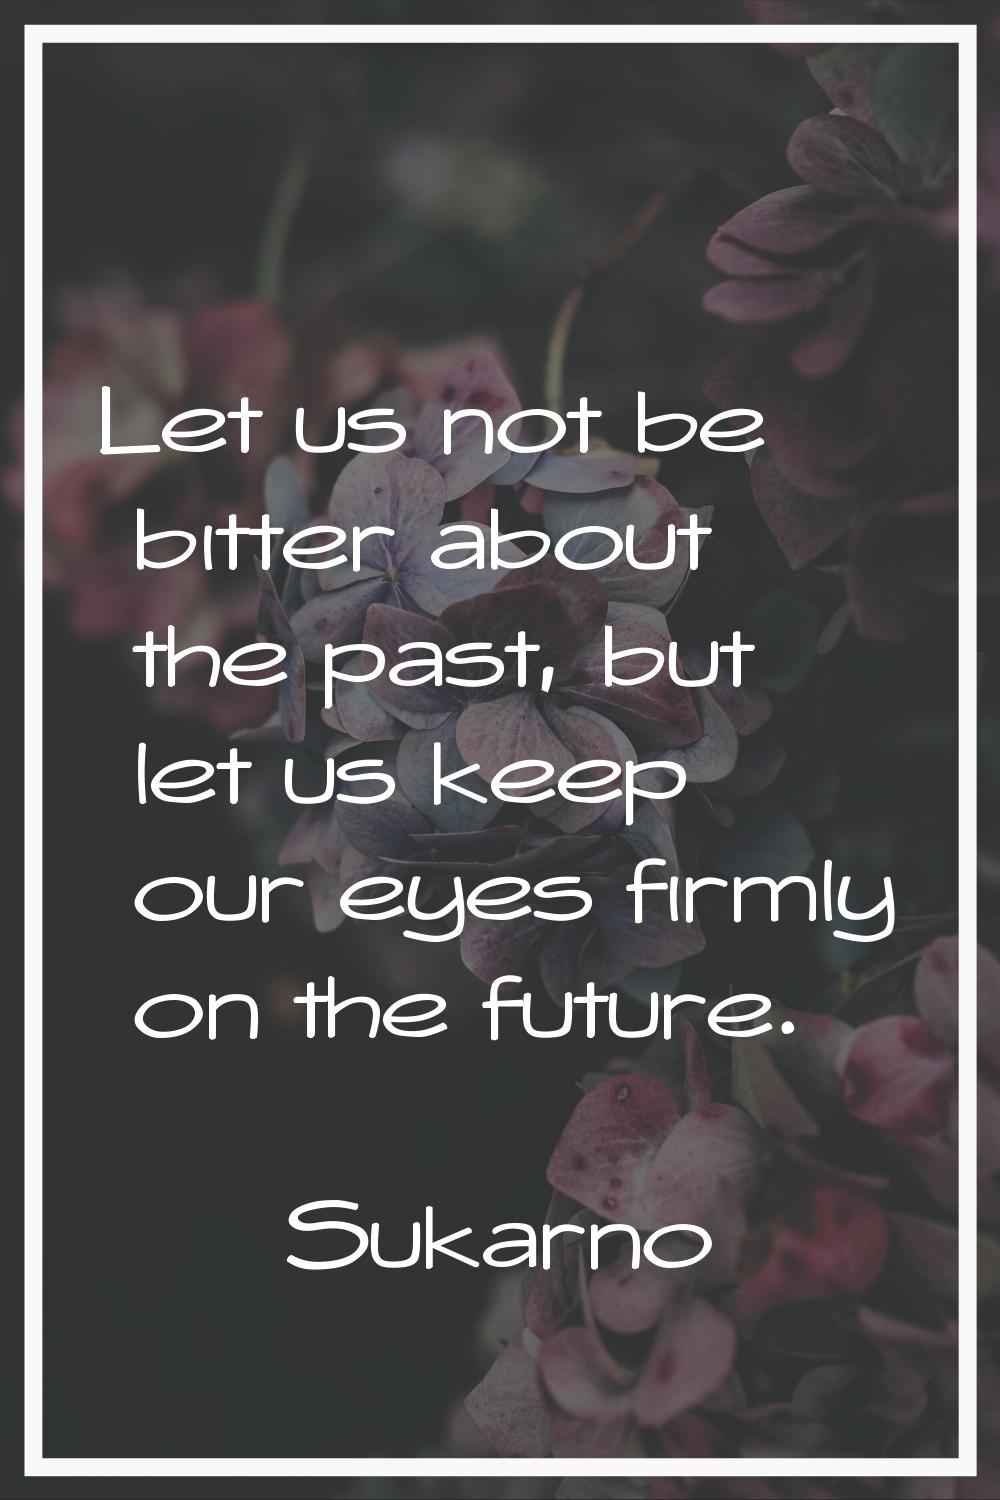 Let us not be bitter about the past, but let us keep our eyes firmly on the future.